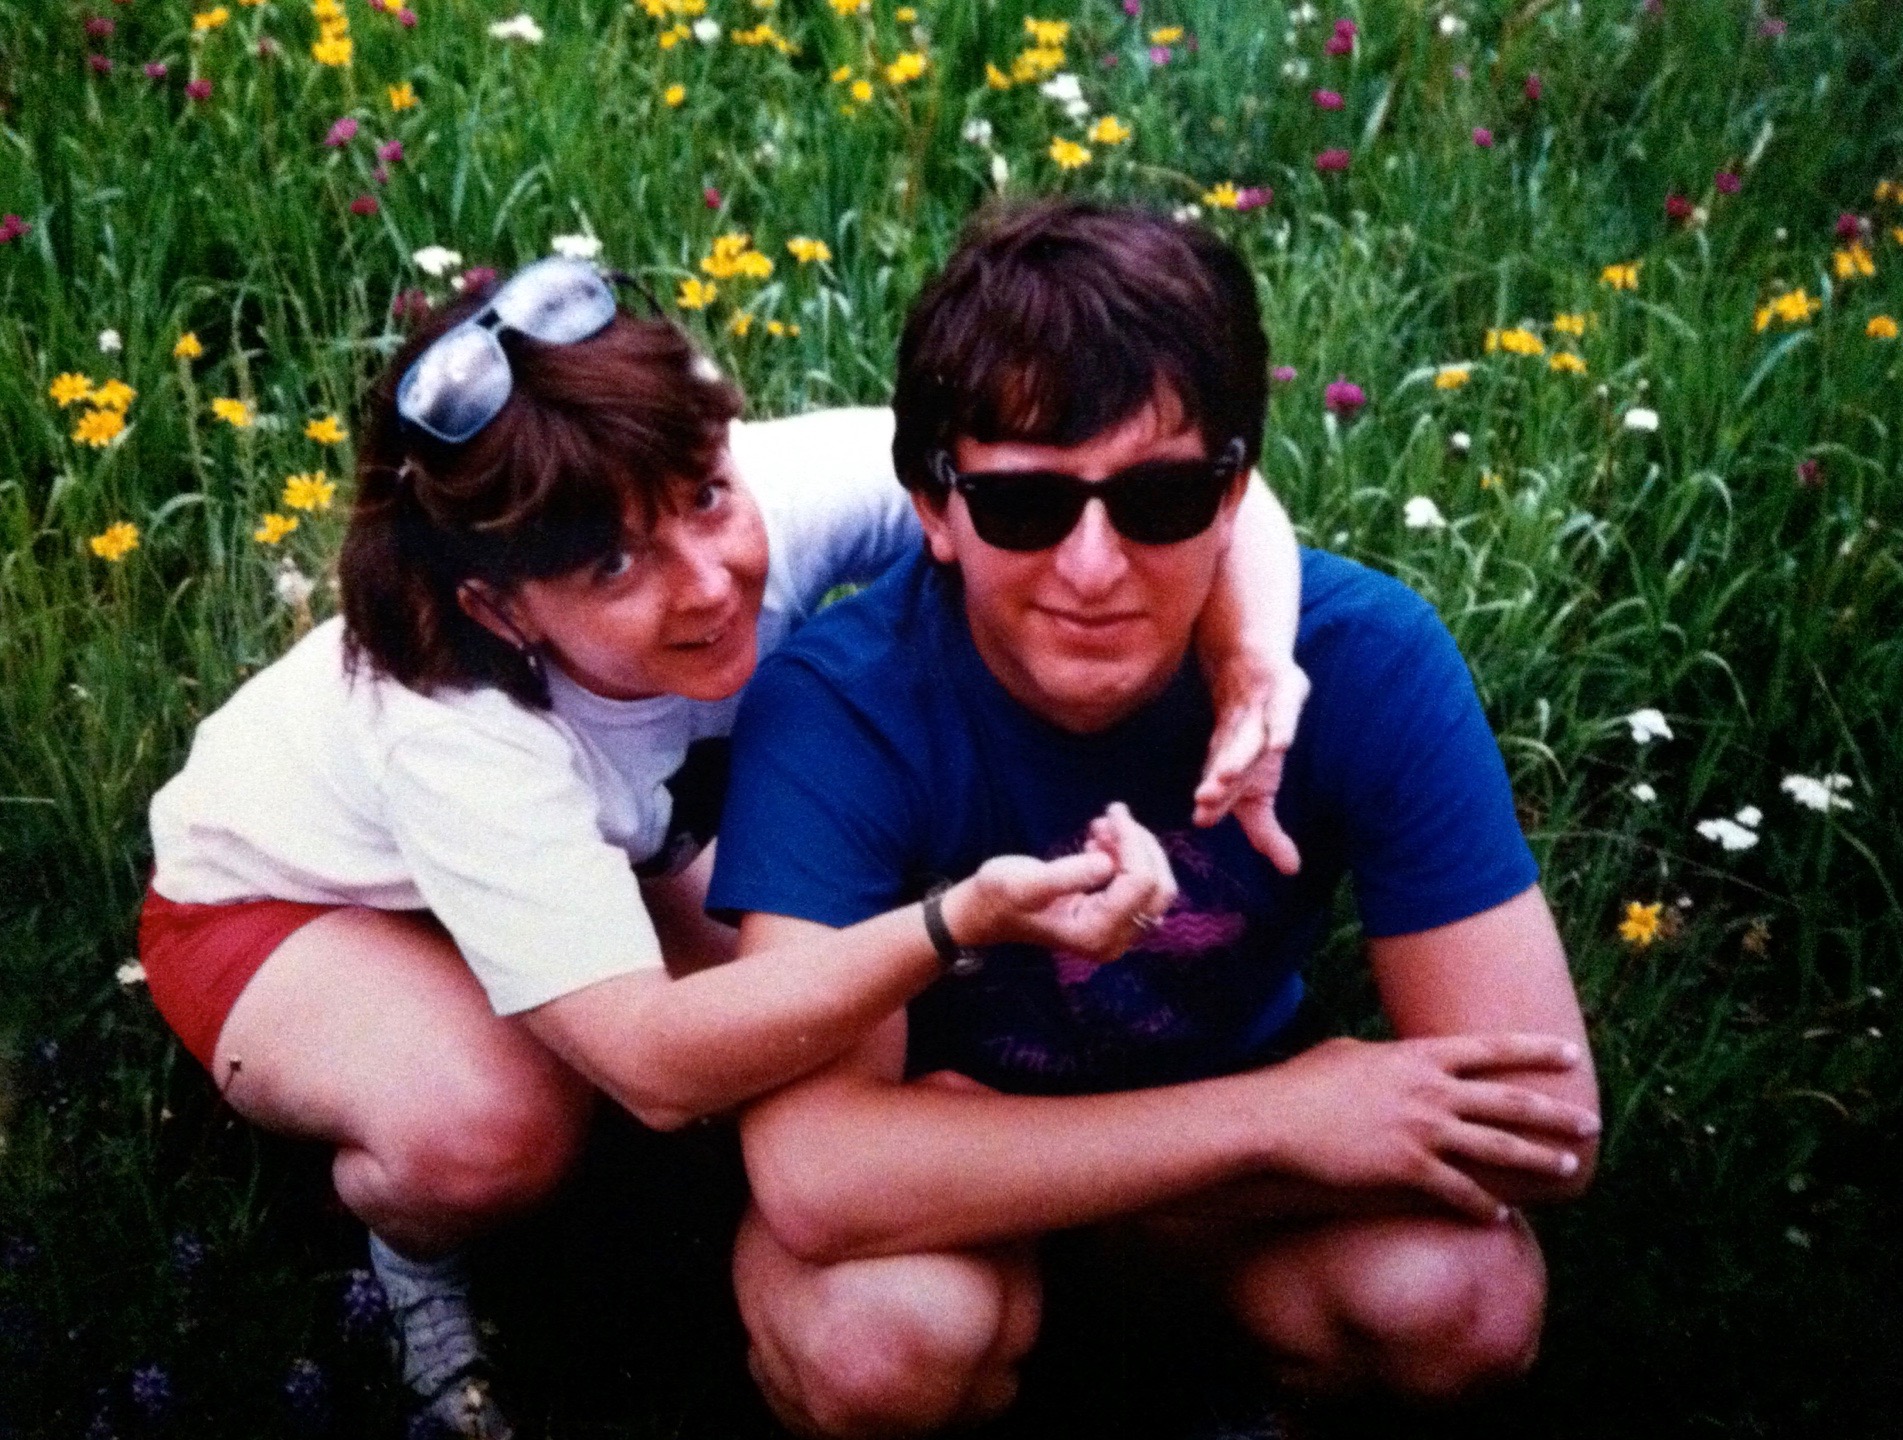 Photo of Debby and Stephan squatting in a field of wildflowers. They are wearing sunglasses and smiling.